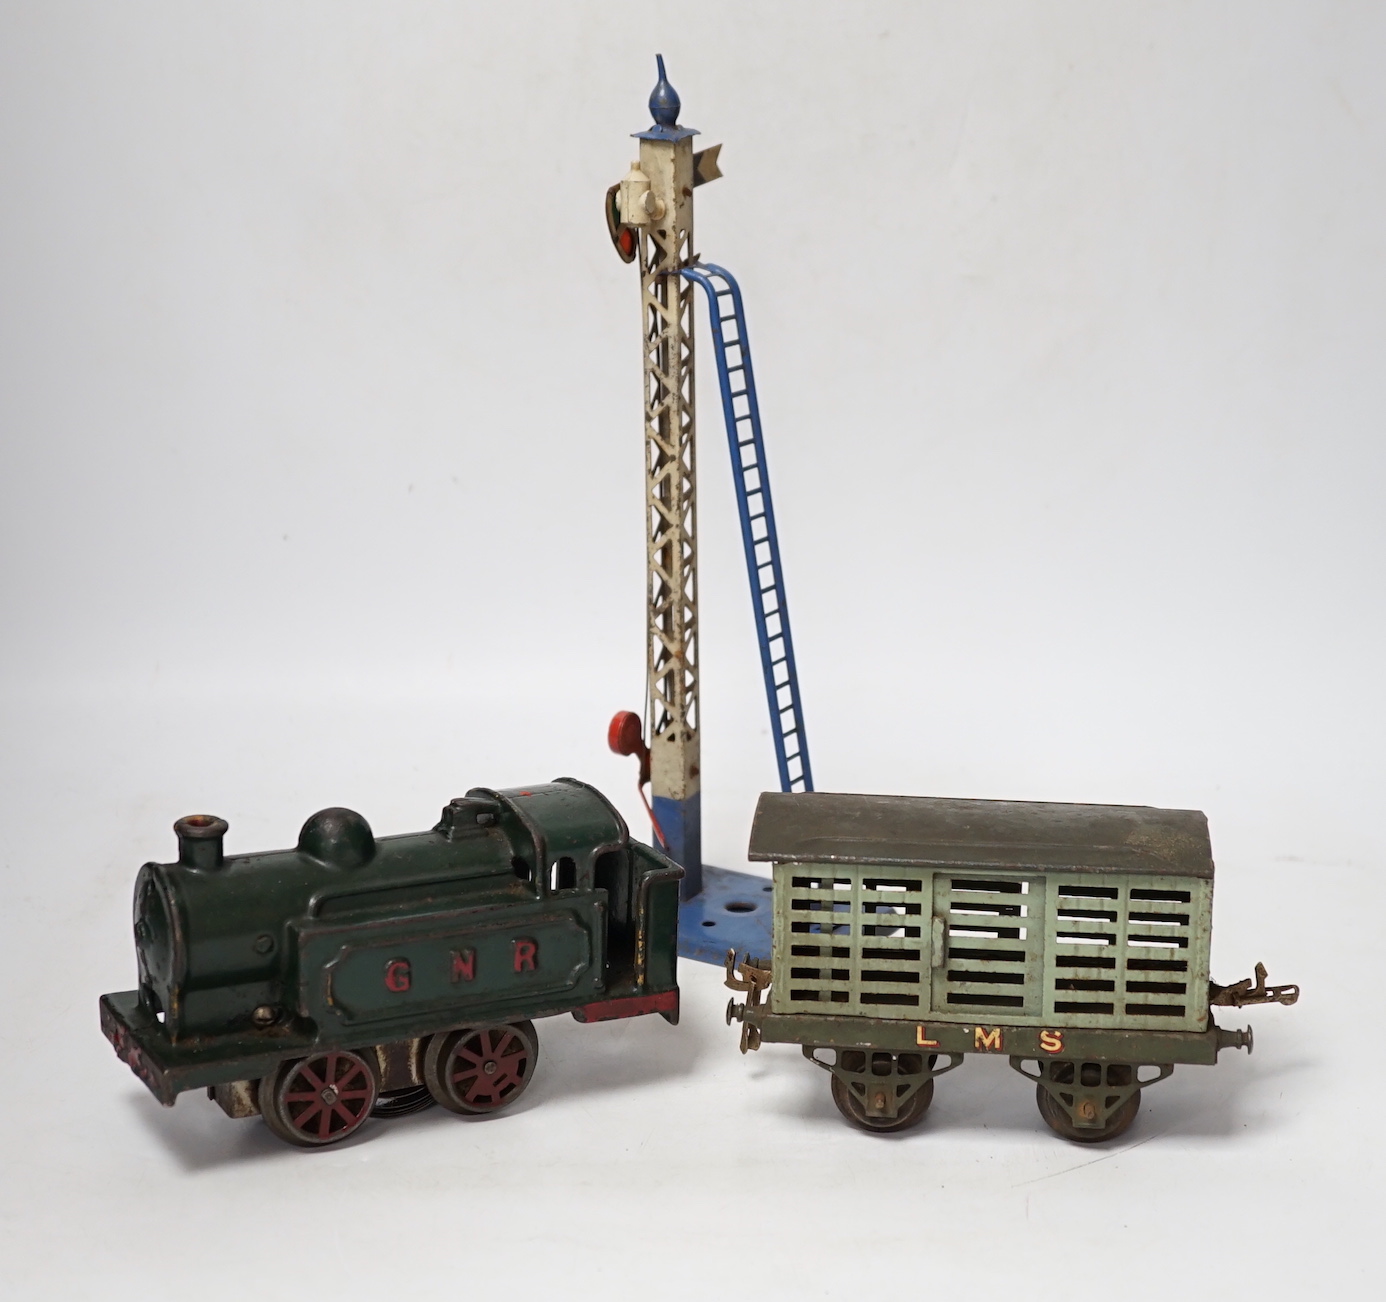 A collection of O gauge clockwork tinplate model railway, including a cast iron clockwork, GNR, 0-4-0T locomotive, six Hornby freight wagons, a small quantity of curved Bassett Lowke track sections and a few other items